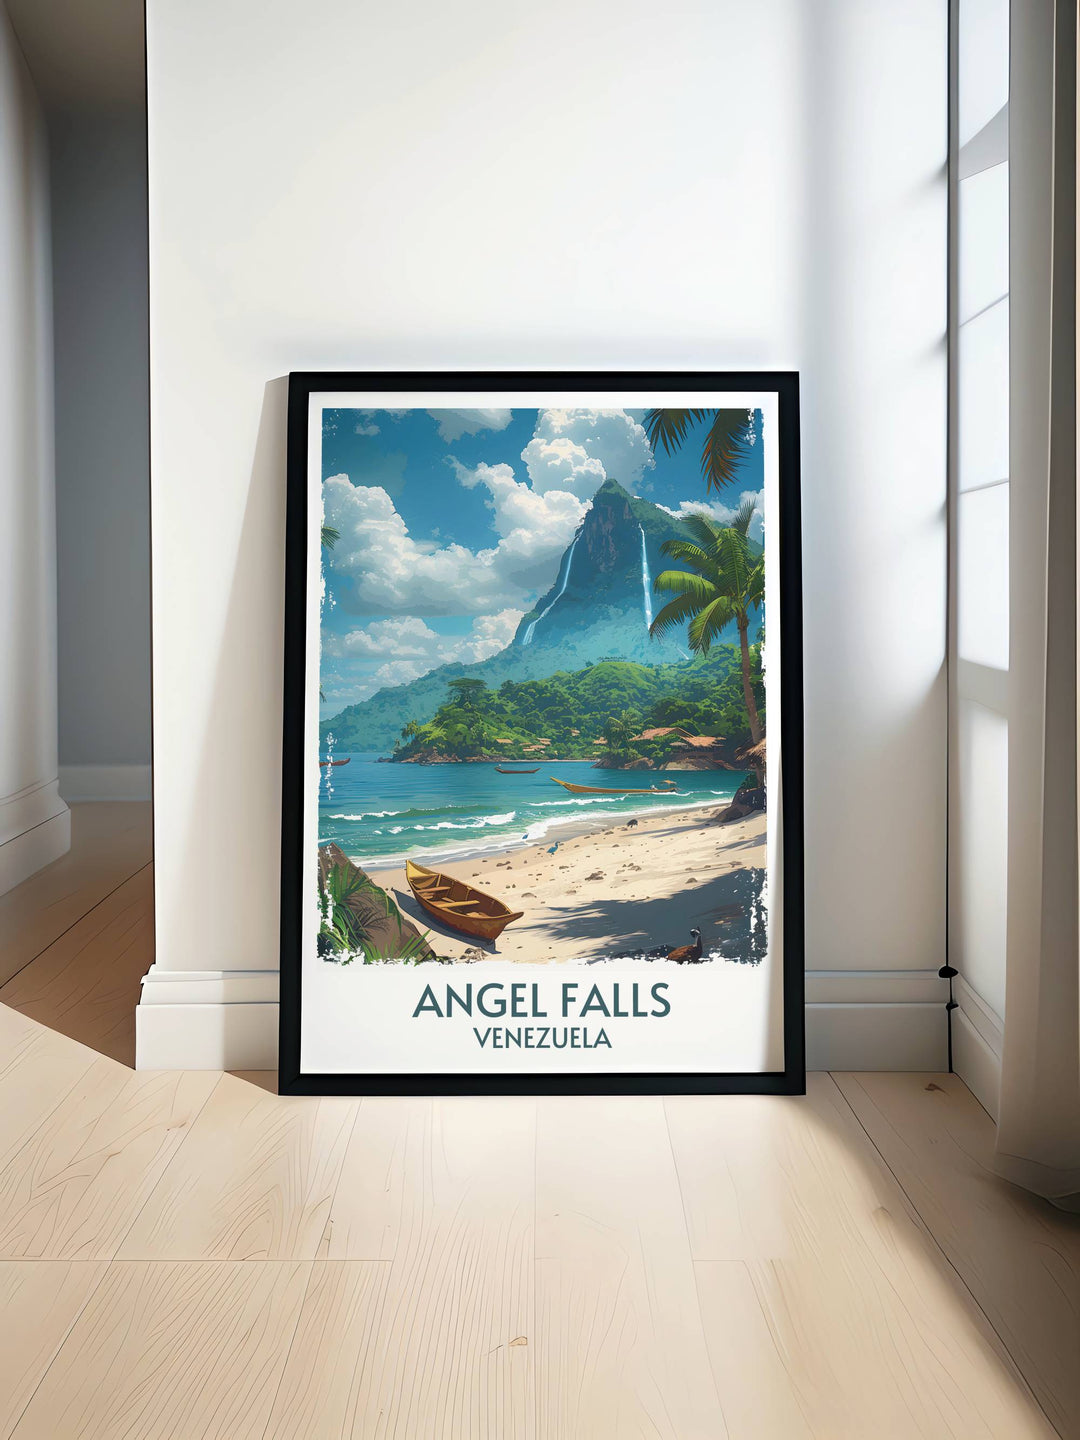 Artistic representation of Angel Falls Canaima National Park, showcasing the towering waterfall and surrounding rainforest in vivid color.